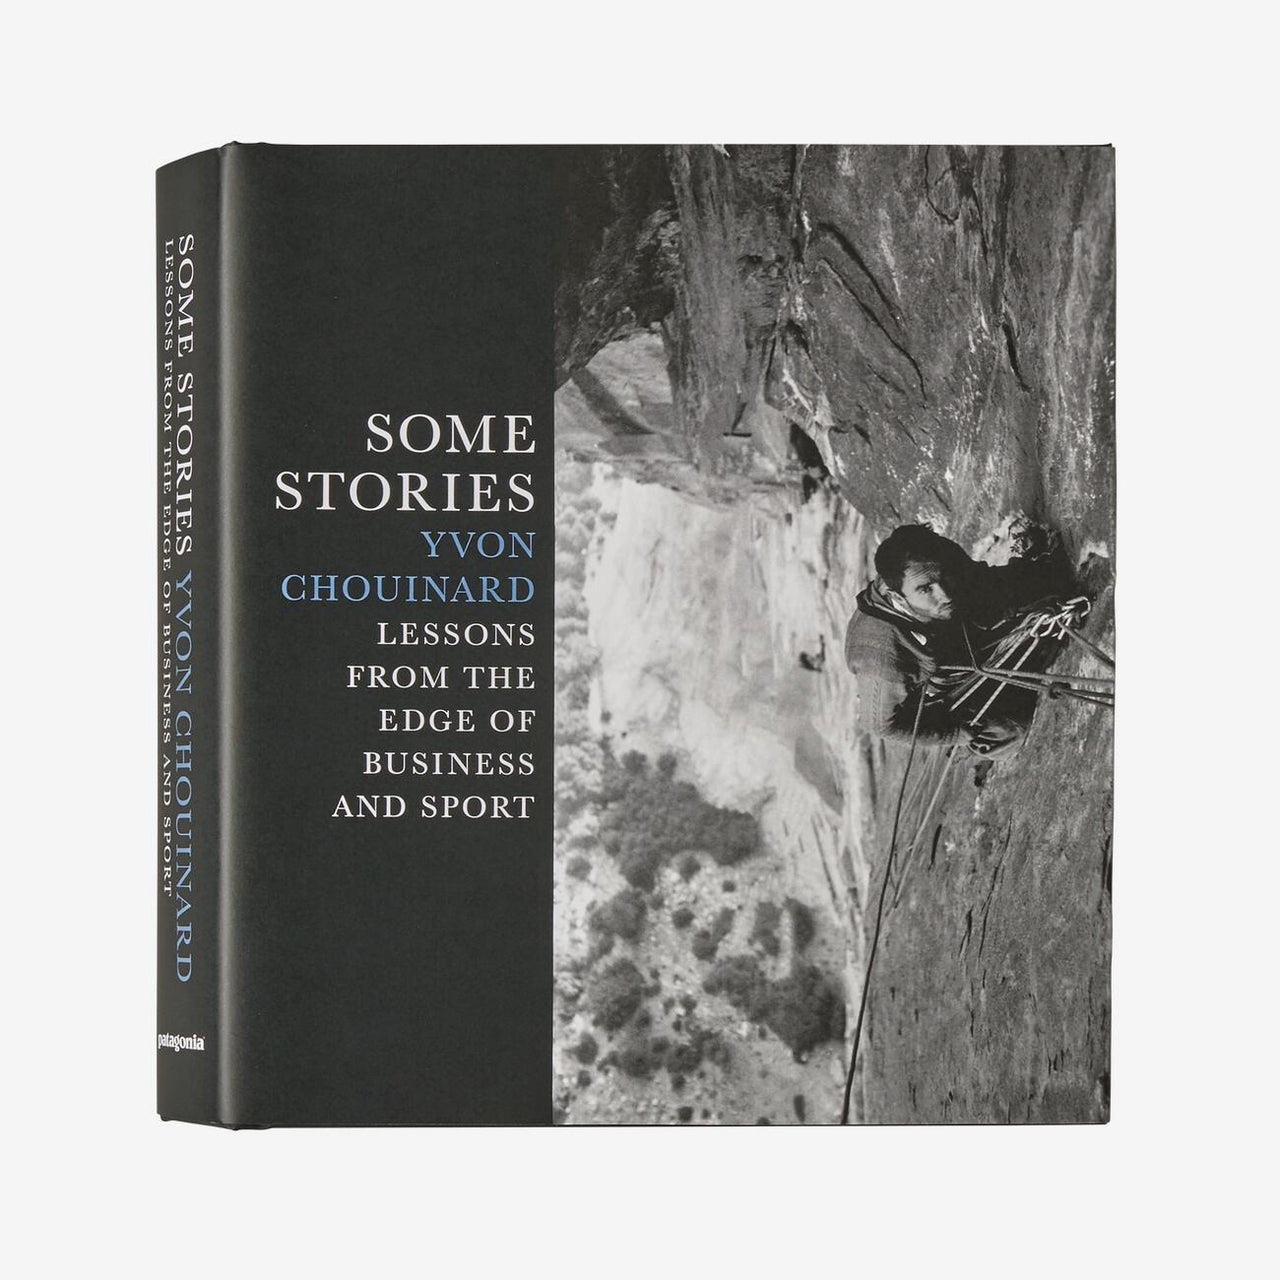 Some Stories: Lessons from the Edge of Business and Sport by Yvon Chouinard (hardcover book) BK805